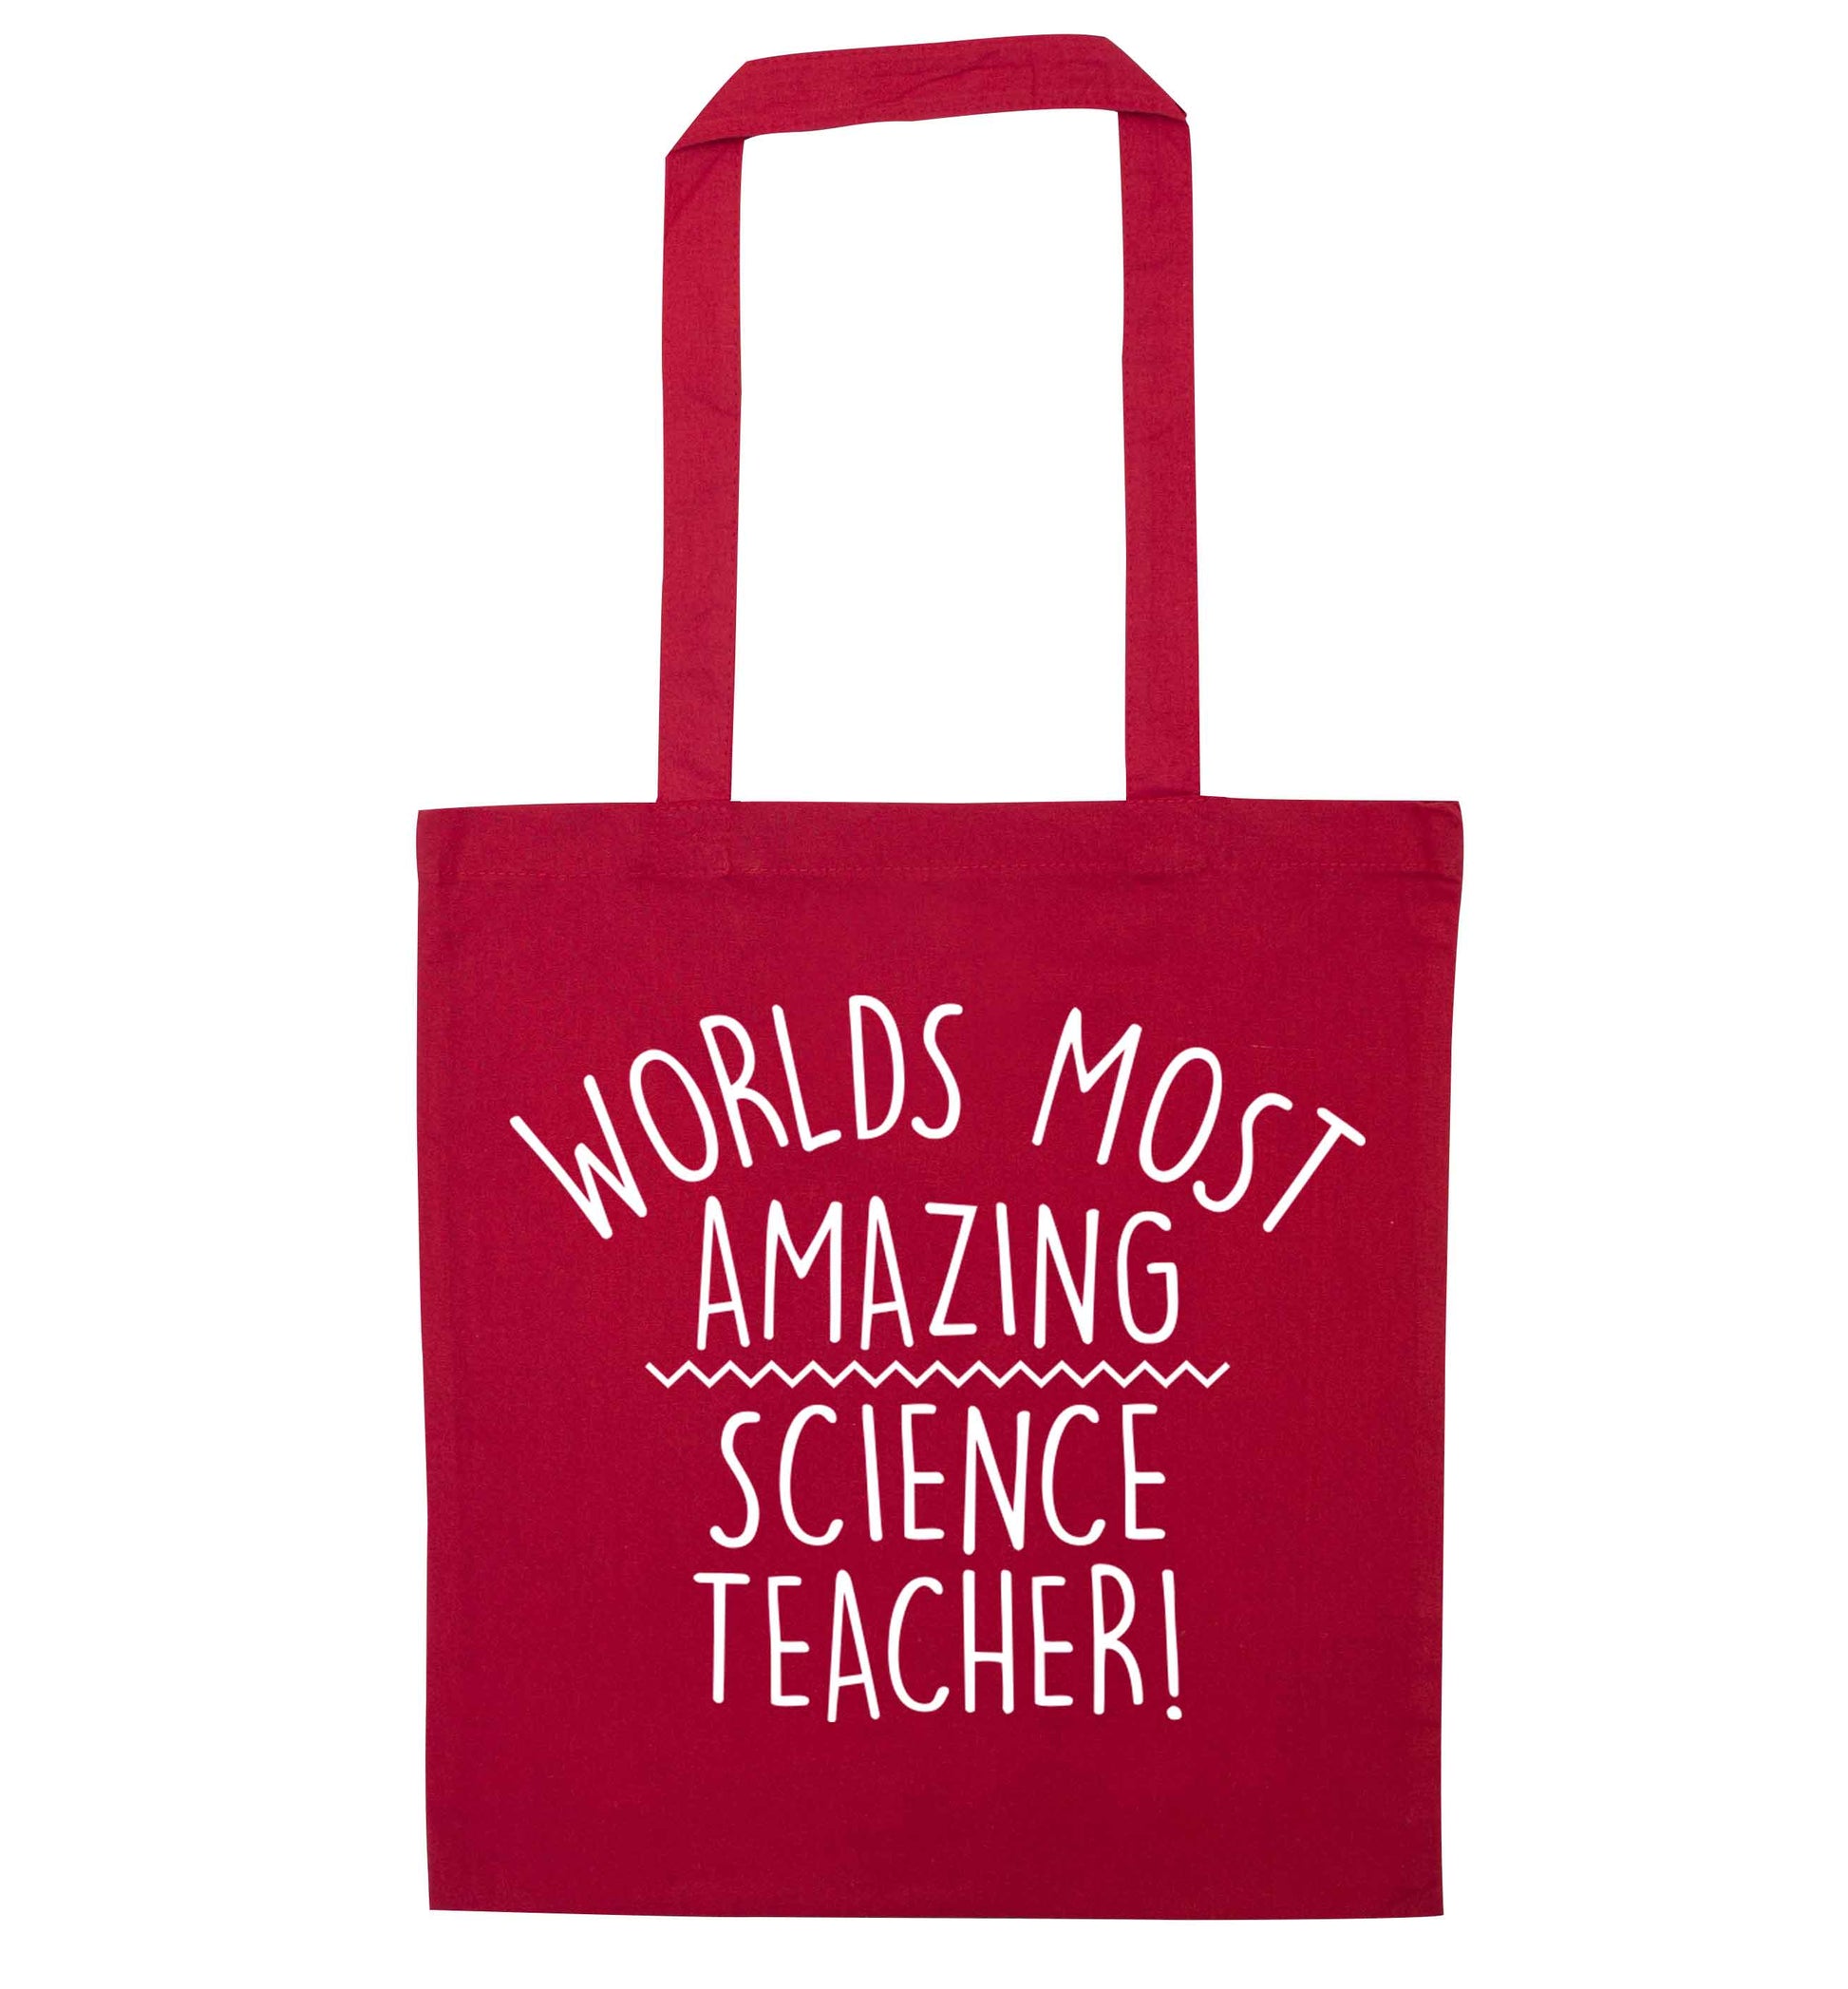 Worlds most amazing science teacher red tote bag